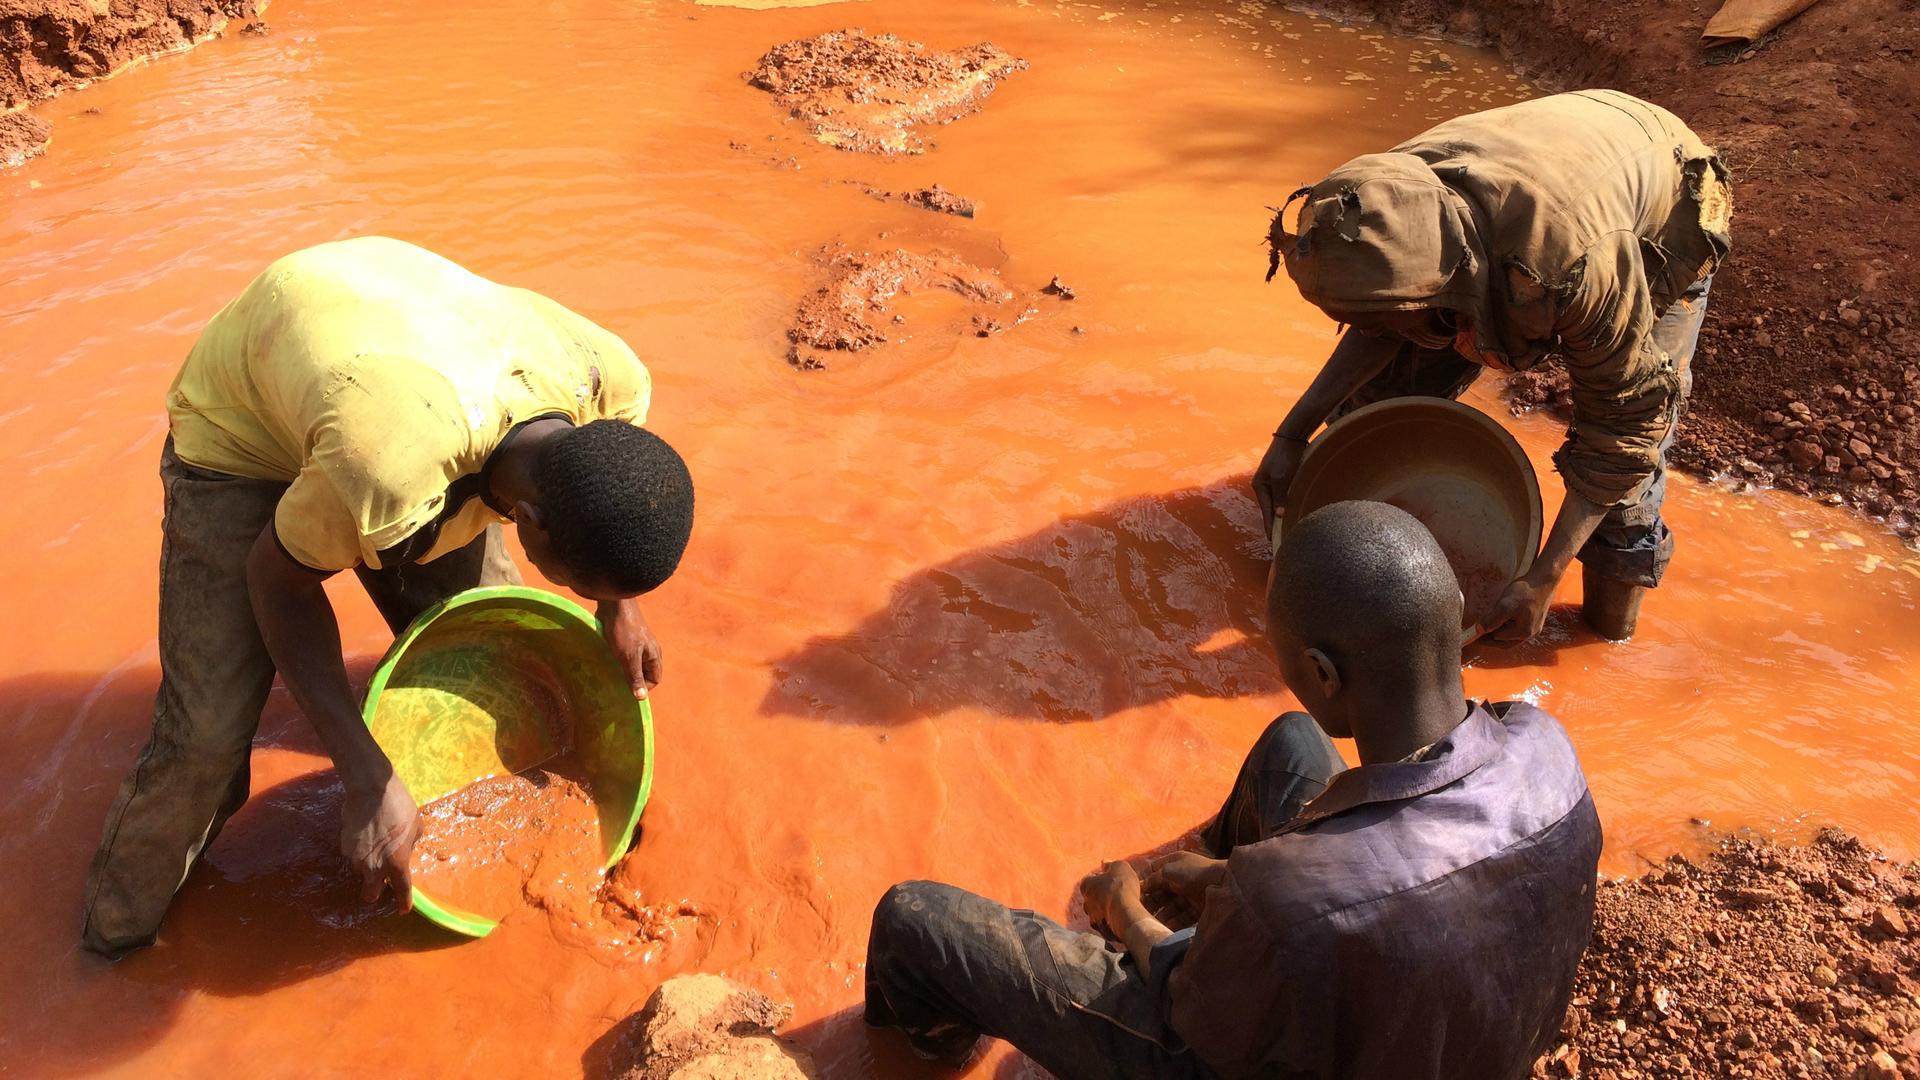 Artisanal gold miners in the Democratic Republic of the Congo use their hands and crude tools to find and extract gold.